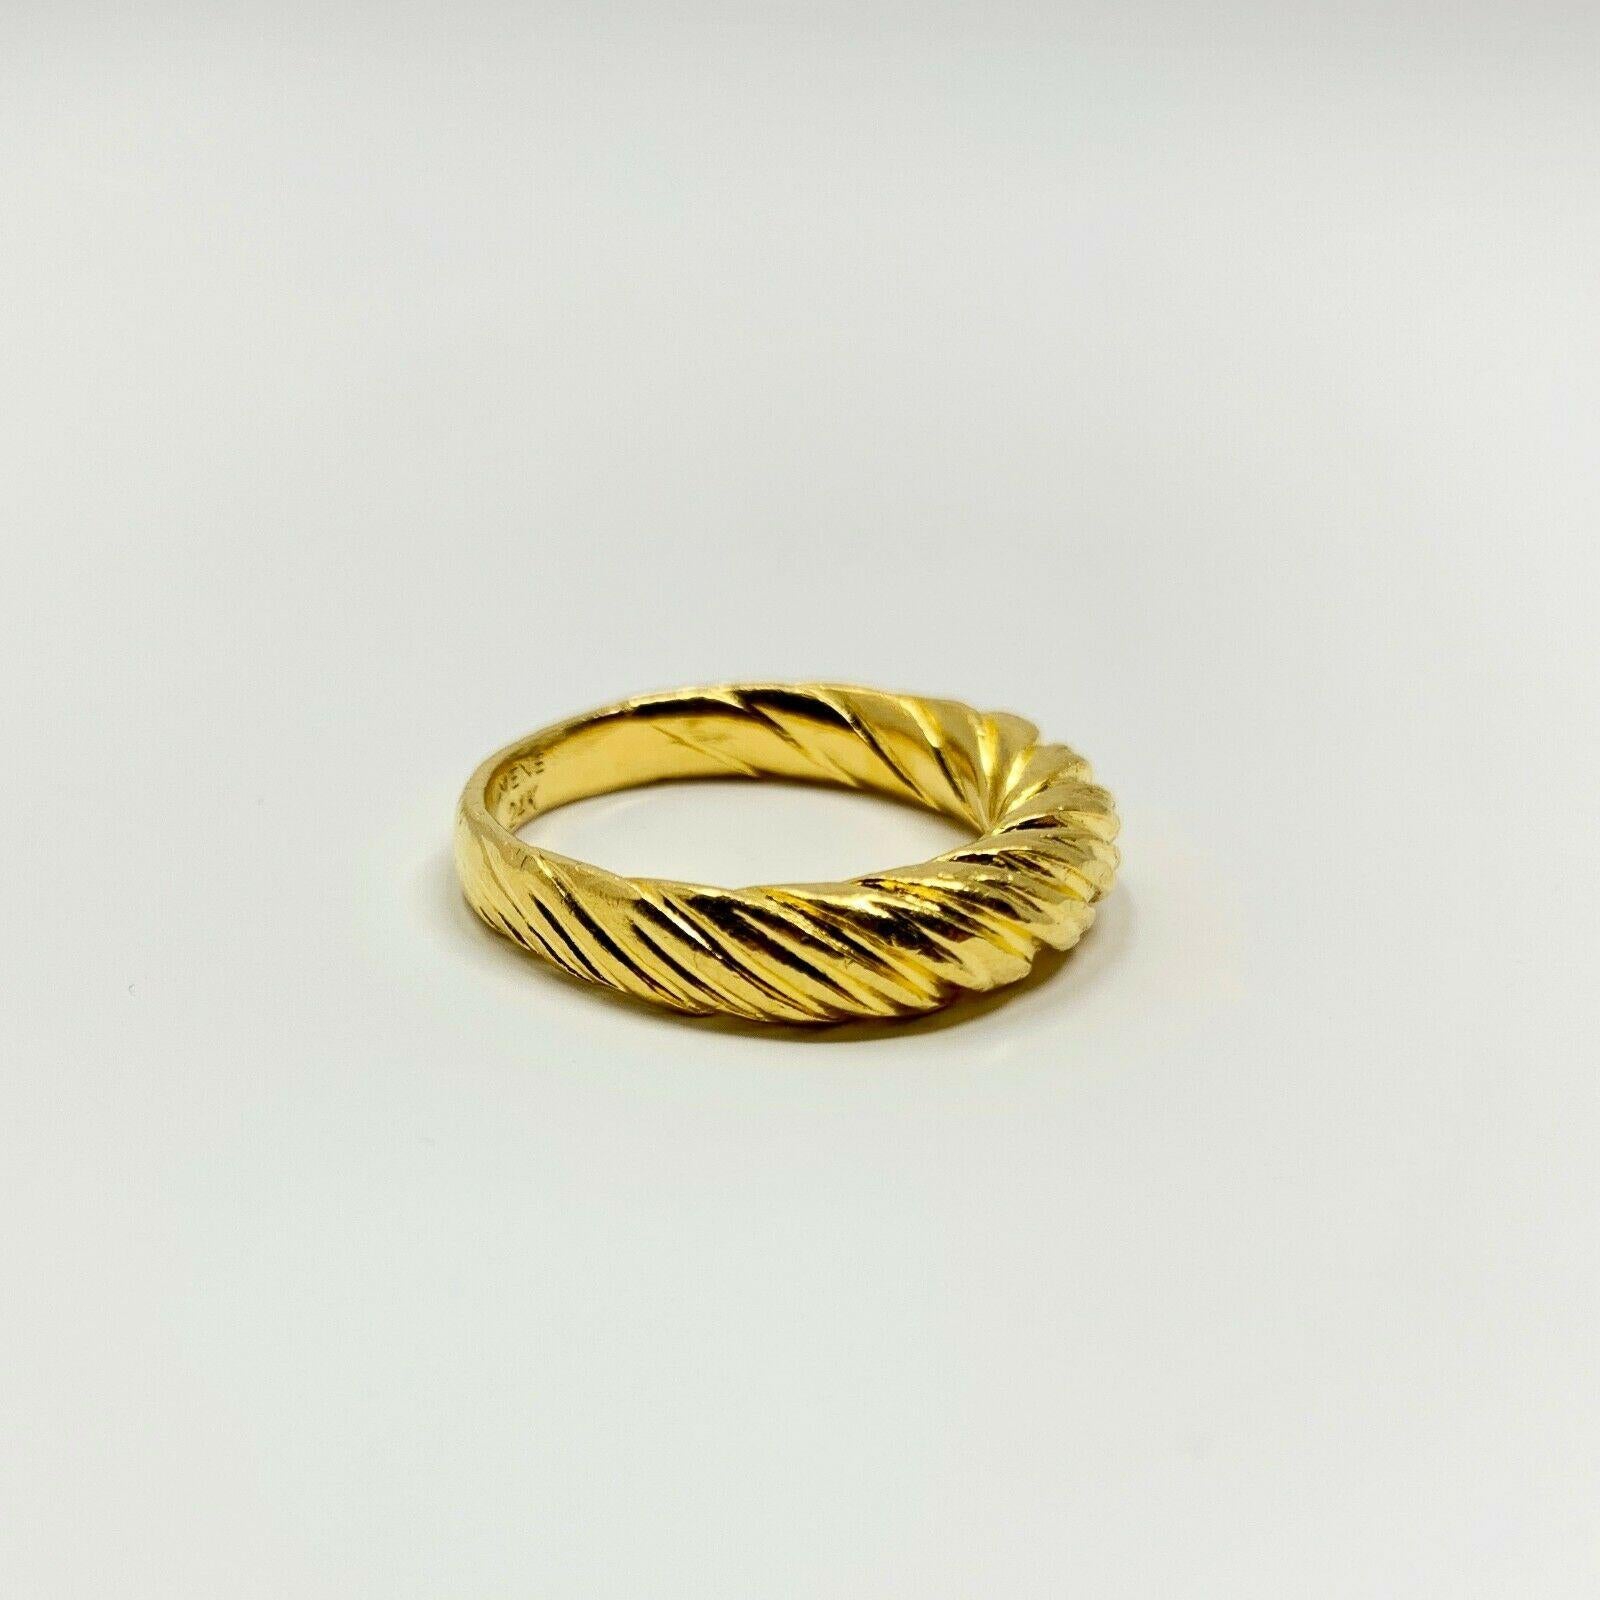 24k Solid Yellow Gold 12.4g Mene Torc Ring Size 9

Condition:  Excellent (Professionally Cleaned and Polished)
Metal:  24k Gold (Marked, and Professionally Tested)
Weight:  12.4g
Size:  9
Band Width:  5mm at widest, 3.5mm at narrowest
Ring Height